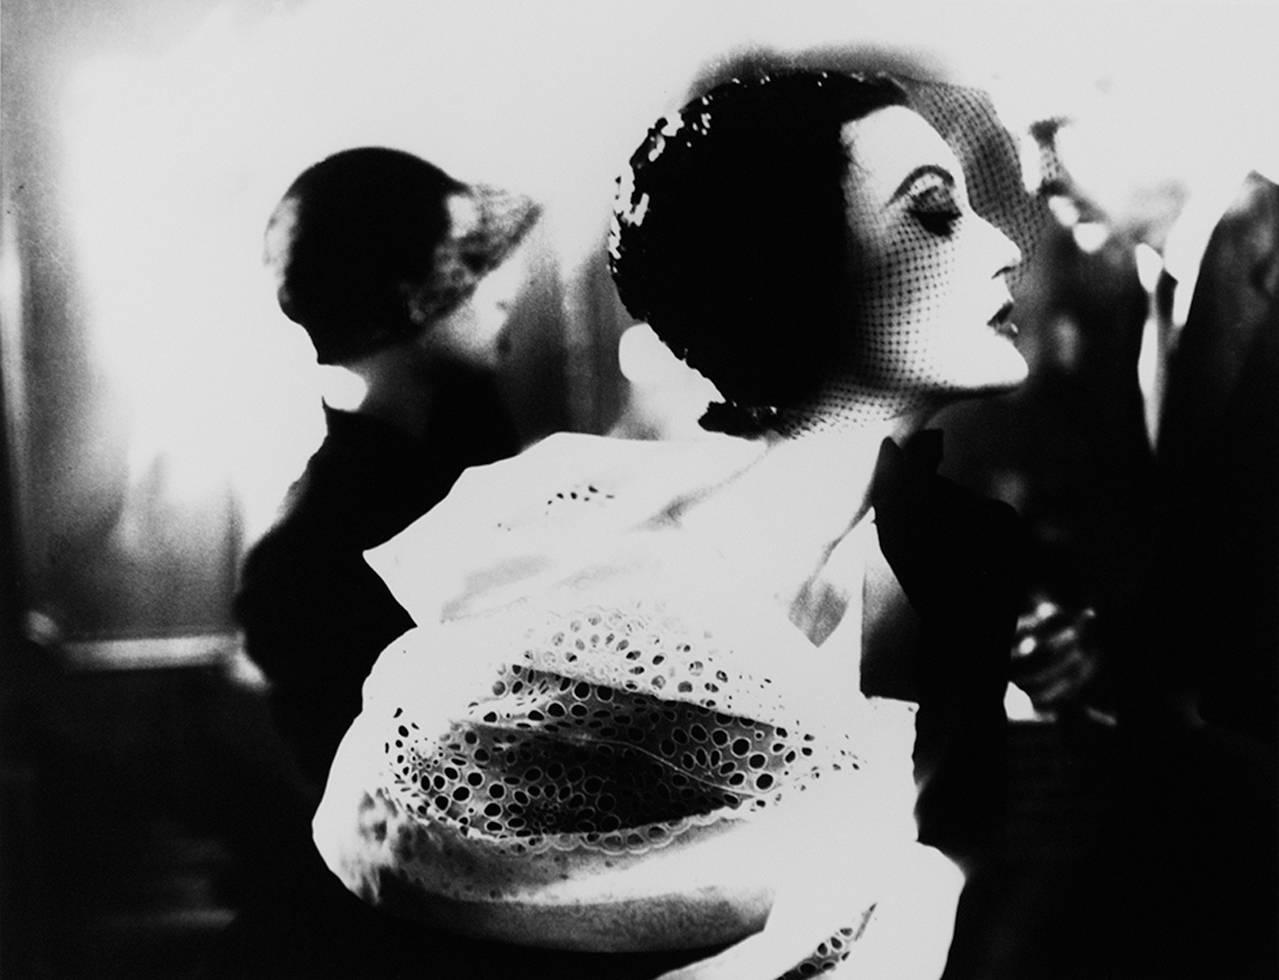 Lillian Bassman Black and White Photograph - Black and White: Mary Jane Russell, Le Pavillion